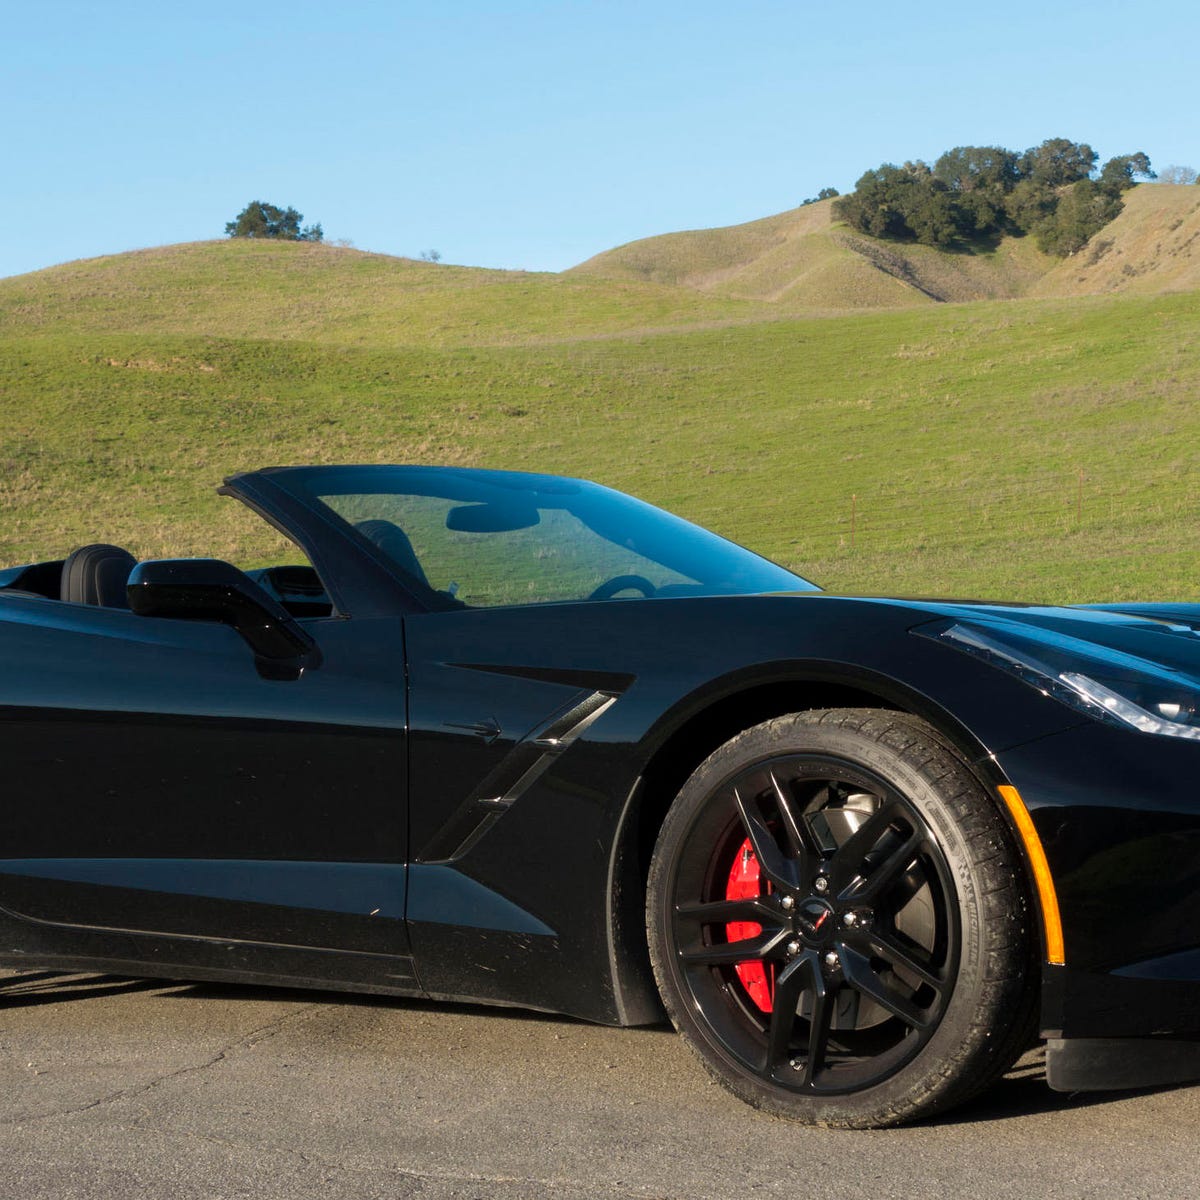 2019 Corvette review: America's sports car is still a thrill - CNET